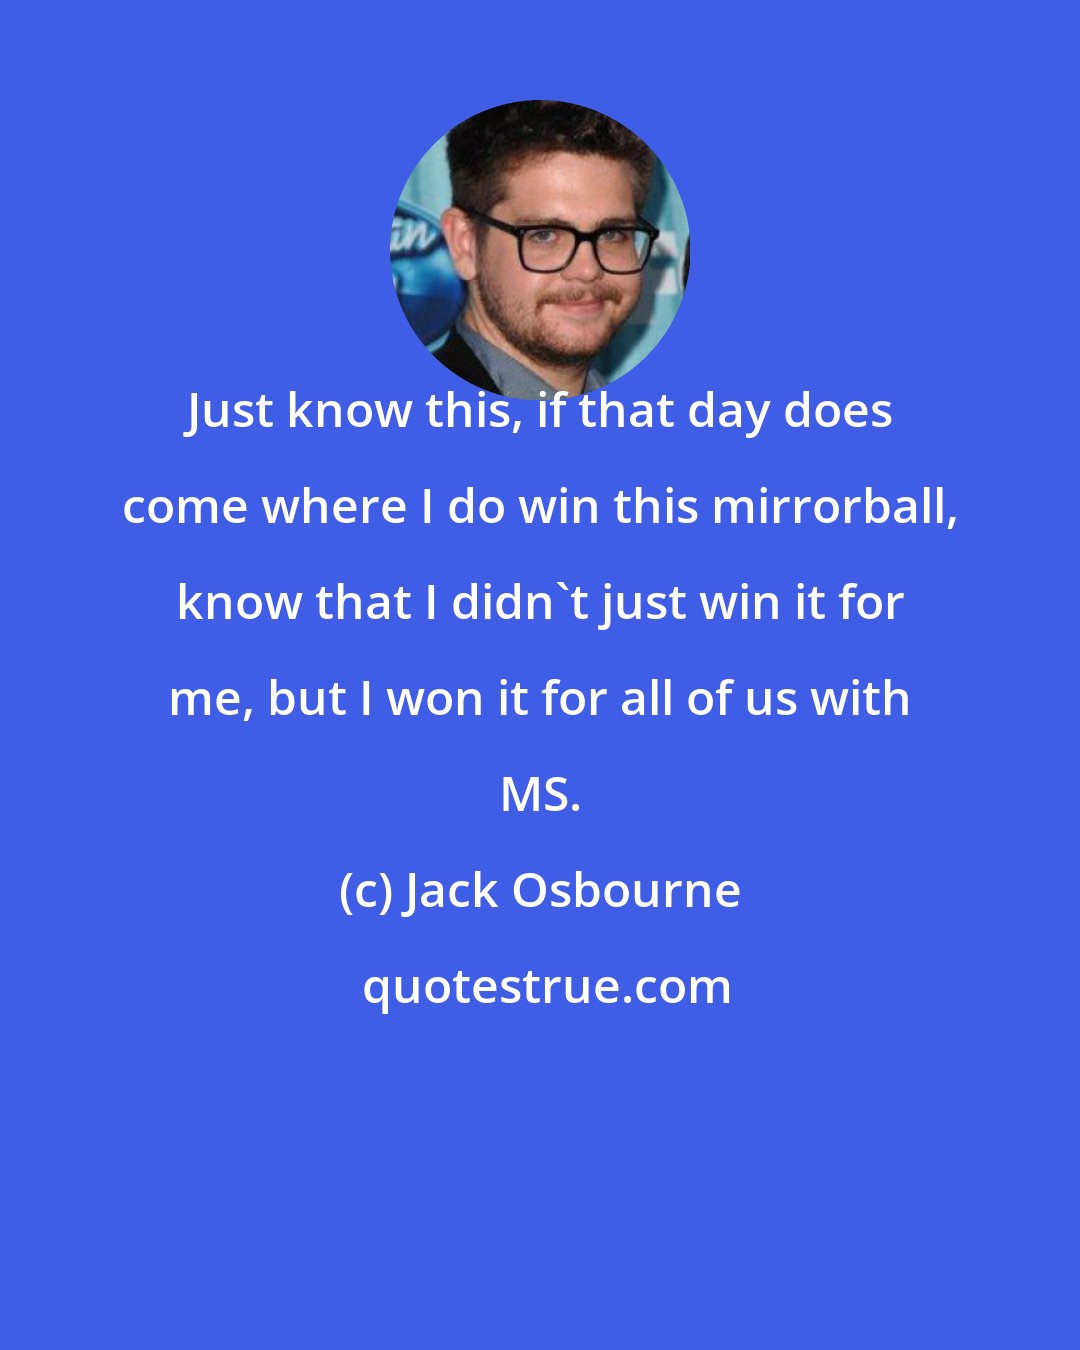 Jack Osbourne: Just know this, if that day does come where I do win this mirrorball, know that I didn't just win it for me, but I won it for all of us with MS.